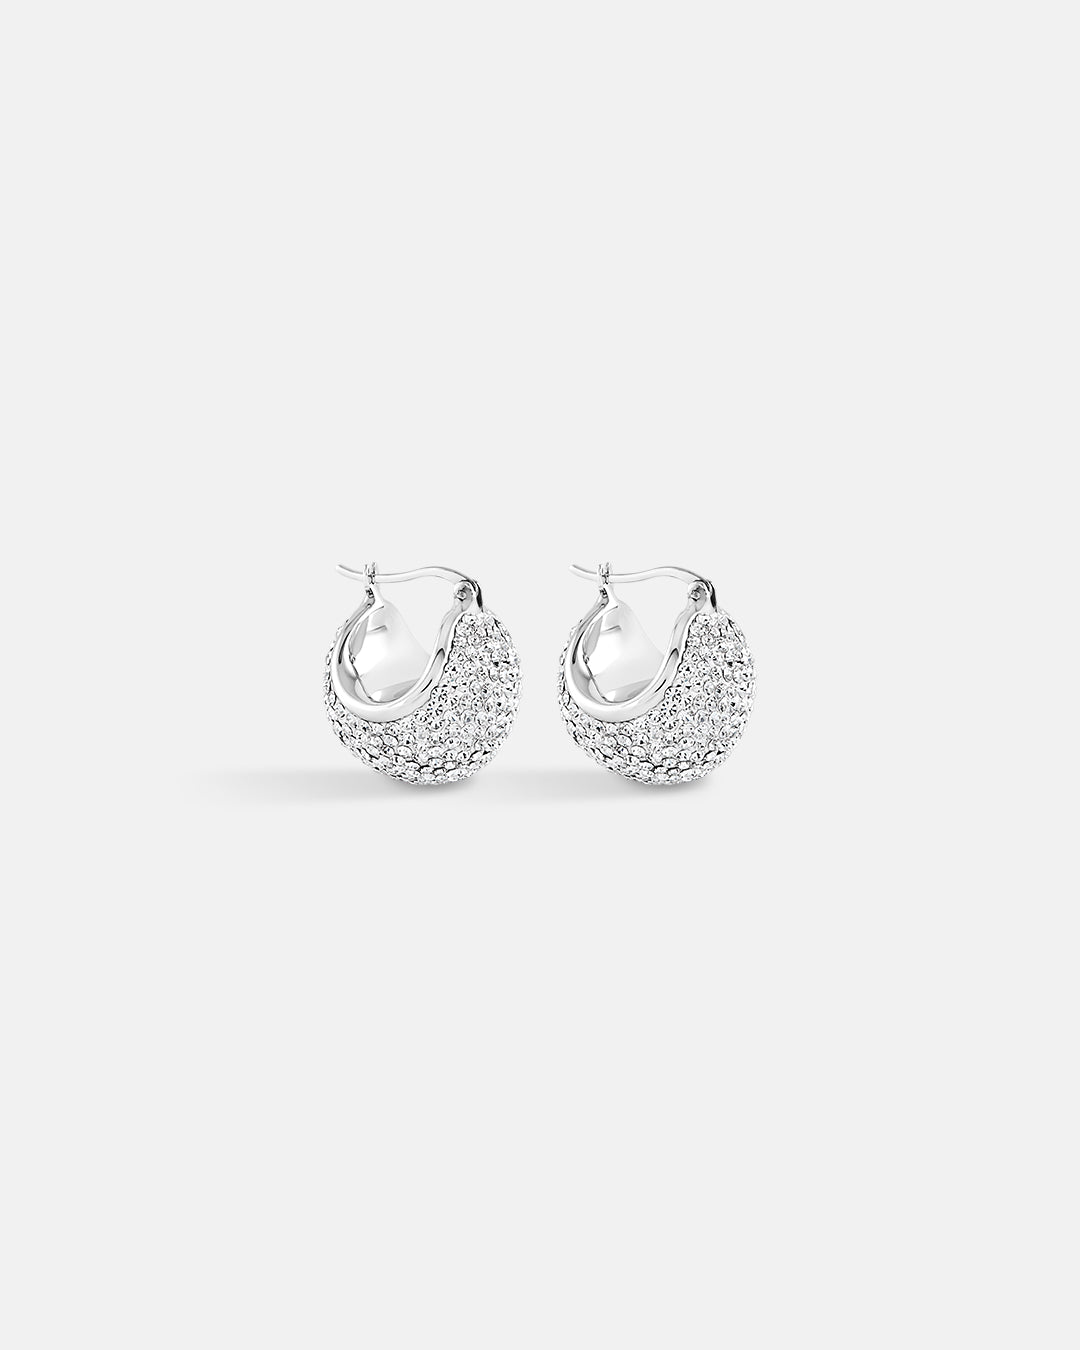 This is the picture of the disco ball hoop earrings made from crystals plated in white gold in sterling silver material